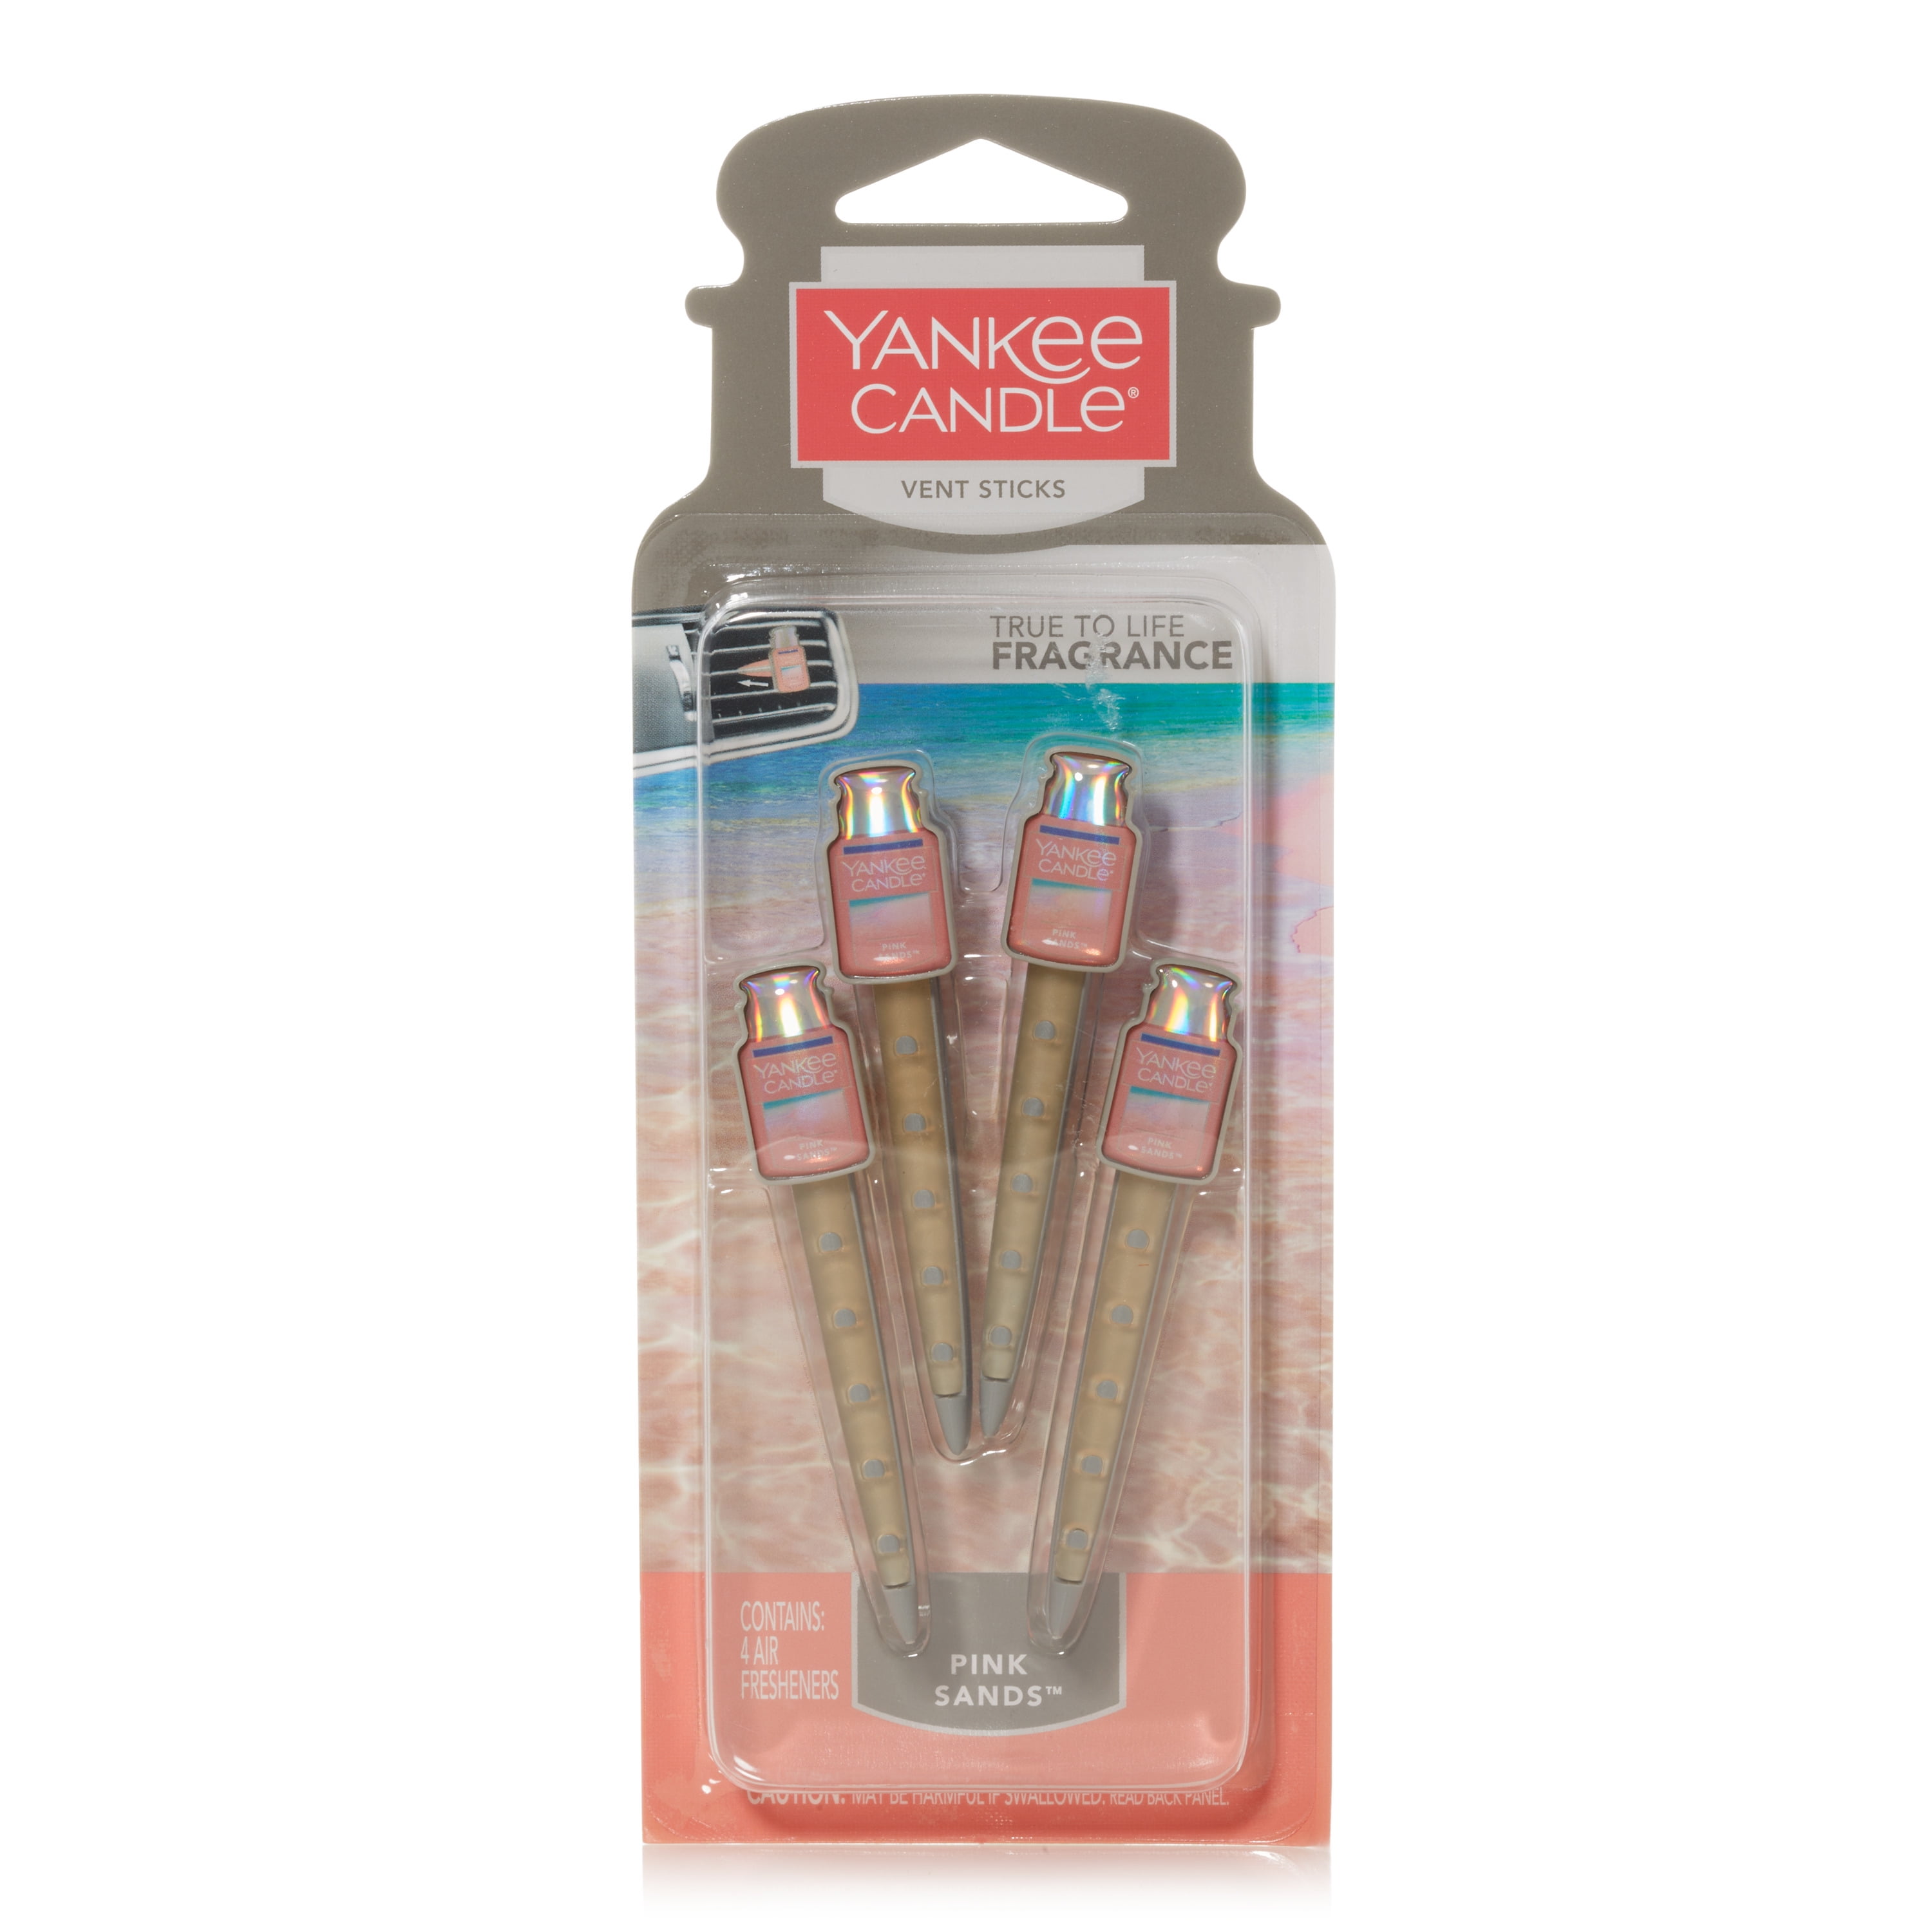 Yankee Candle Pink Sands Car Vent Stick